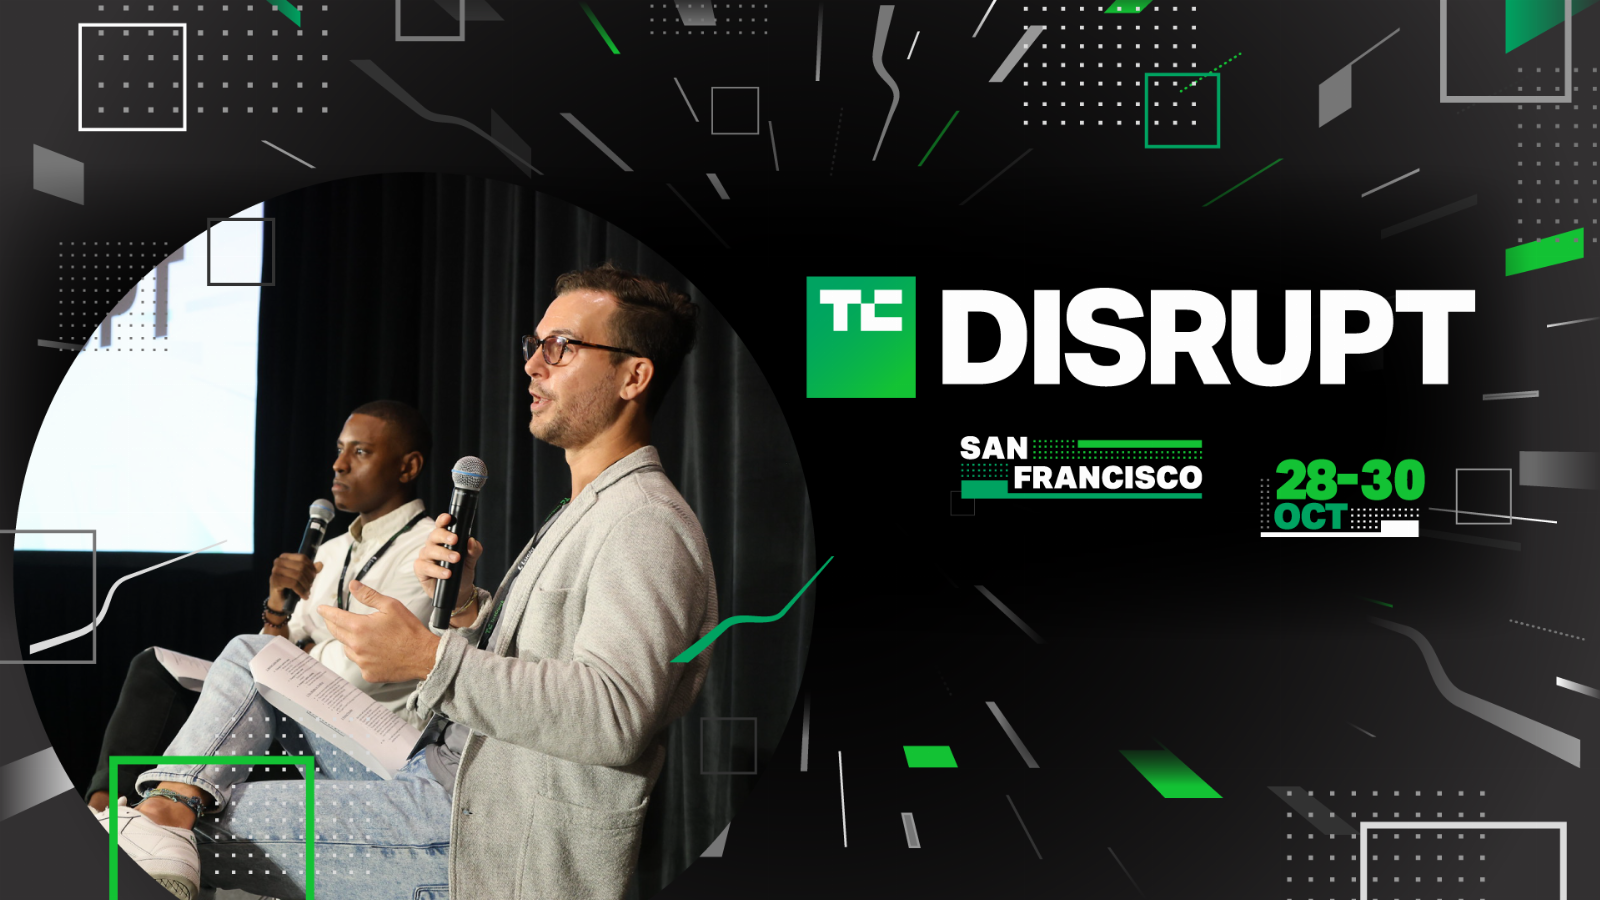 2 days left to vote for Disrupt Audience Choice